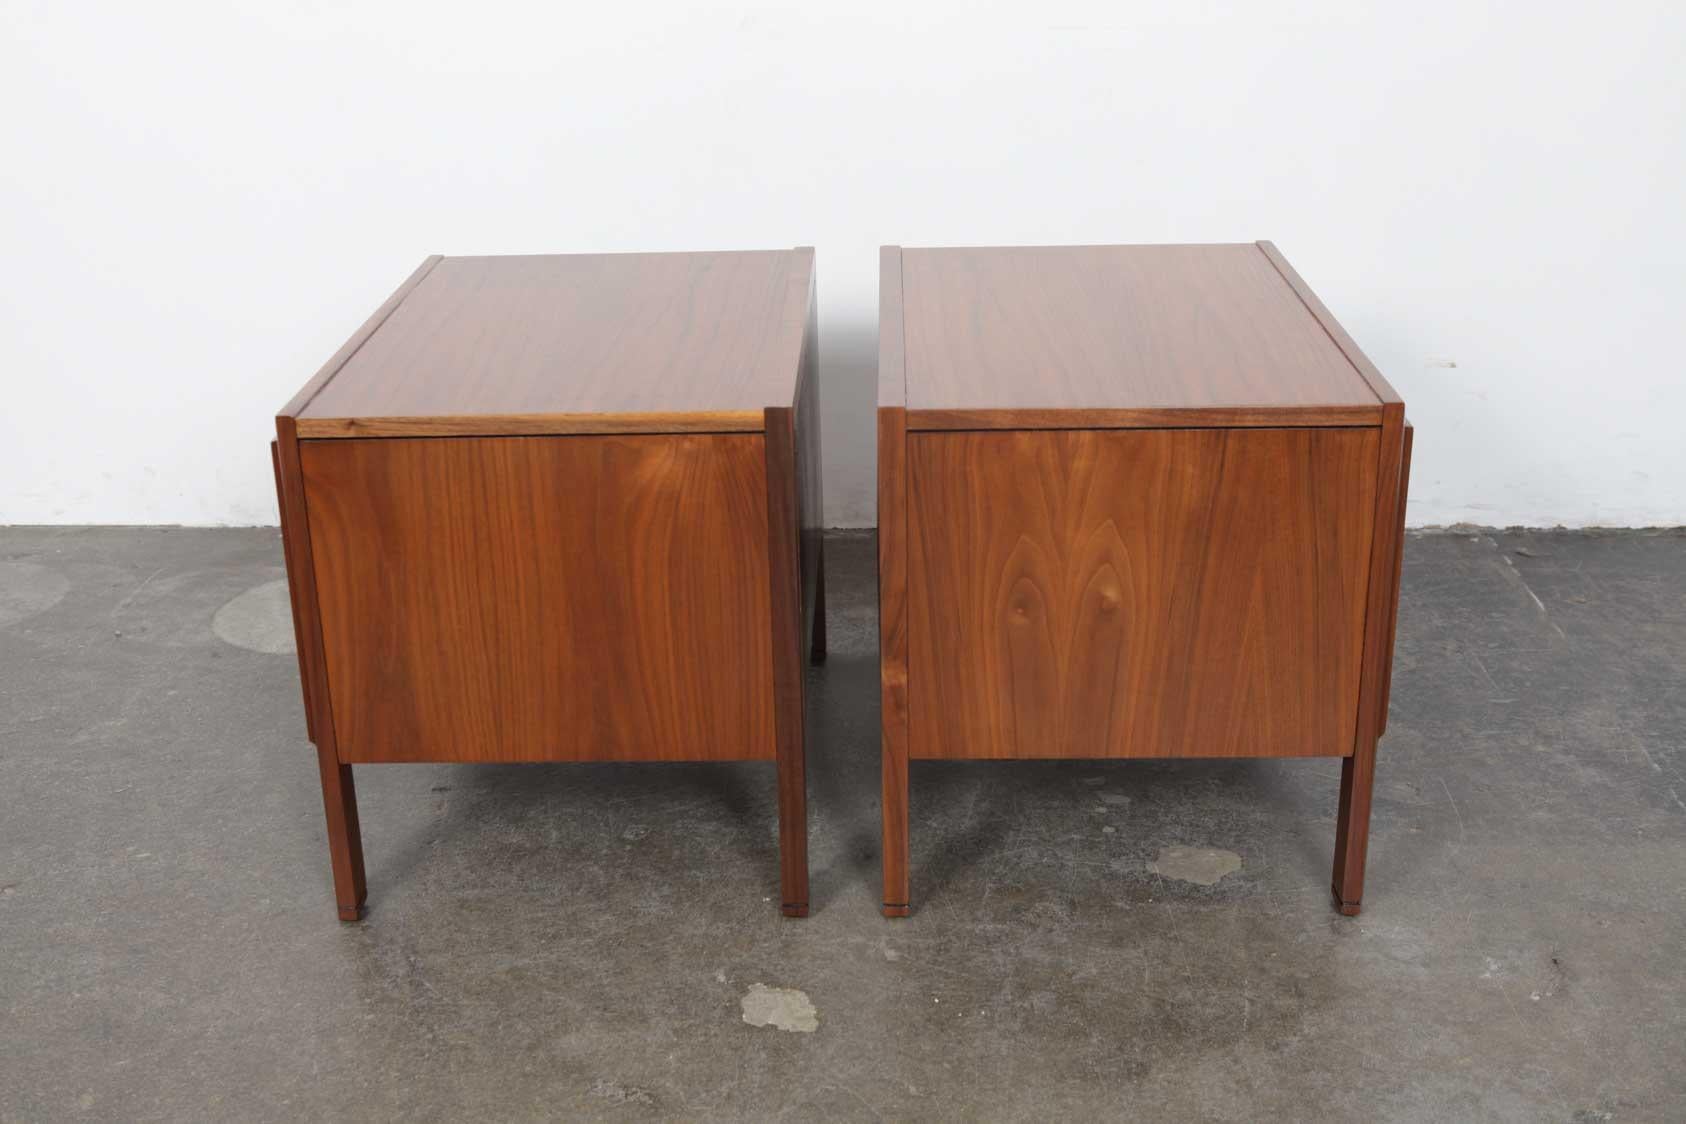 American Pair of Walnut End Tables by Milo Baughman for Glenn of California